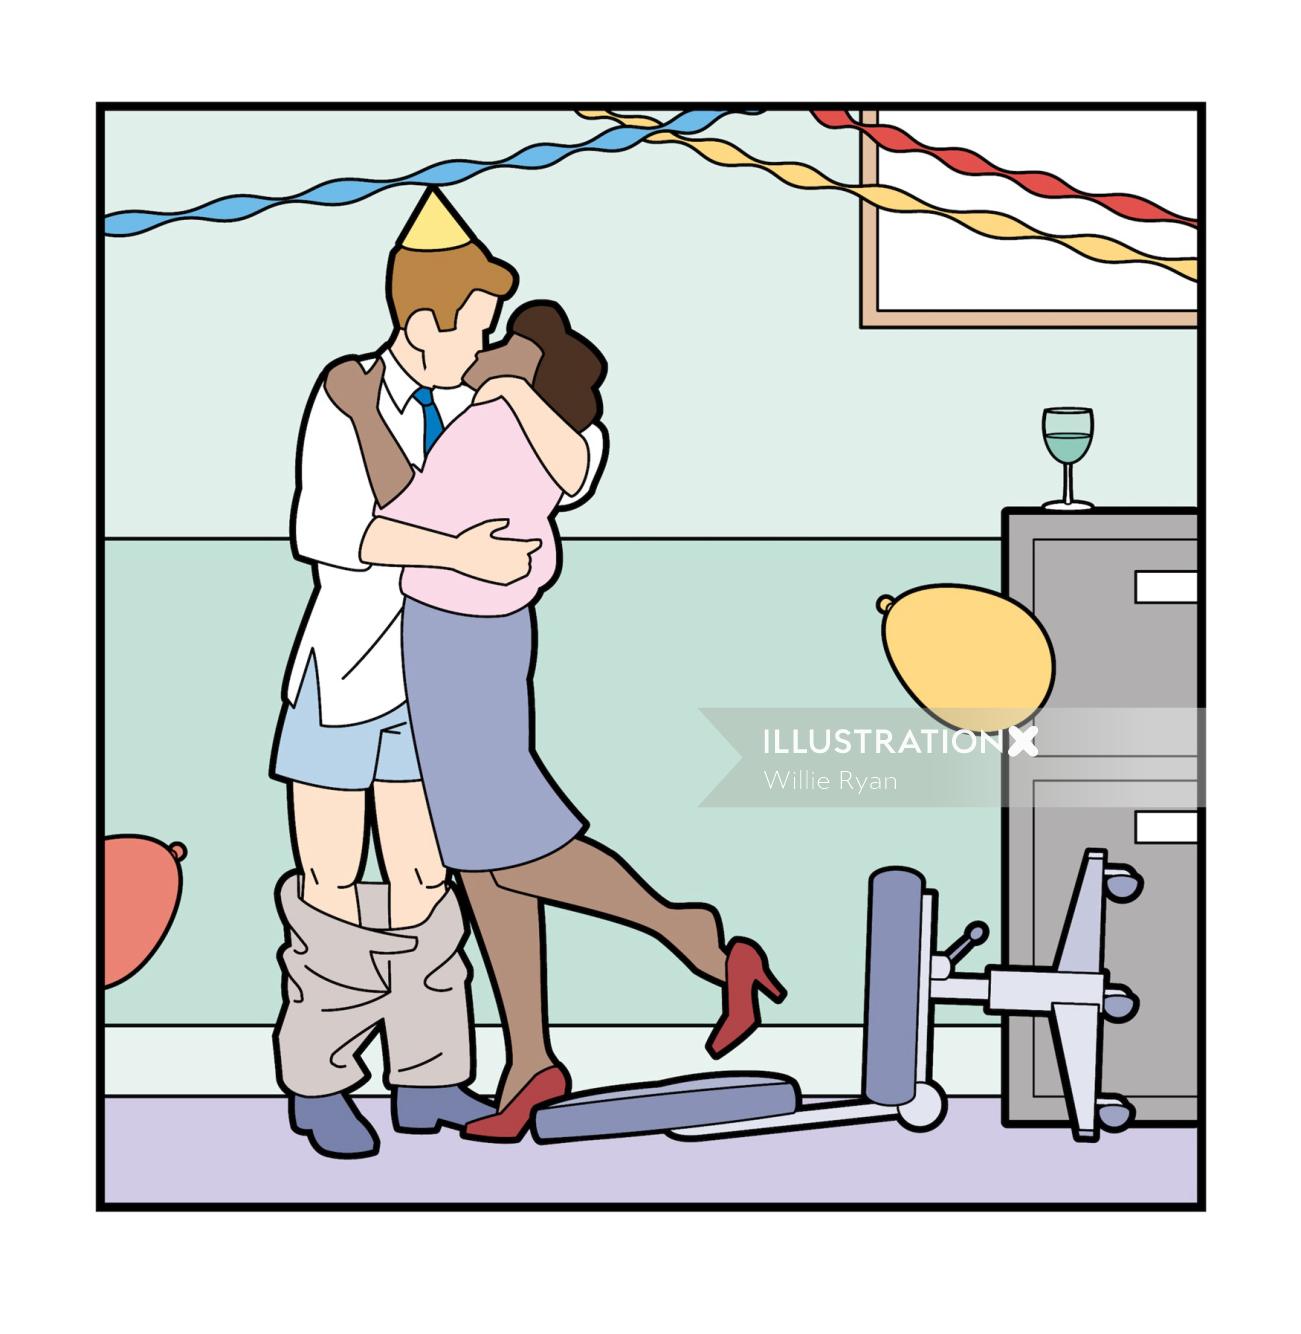 Office party kissing illustration for Research magazine